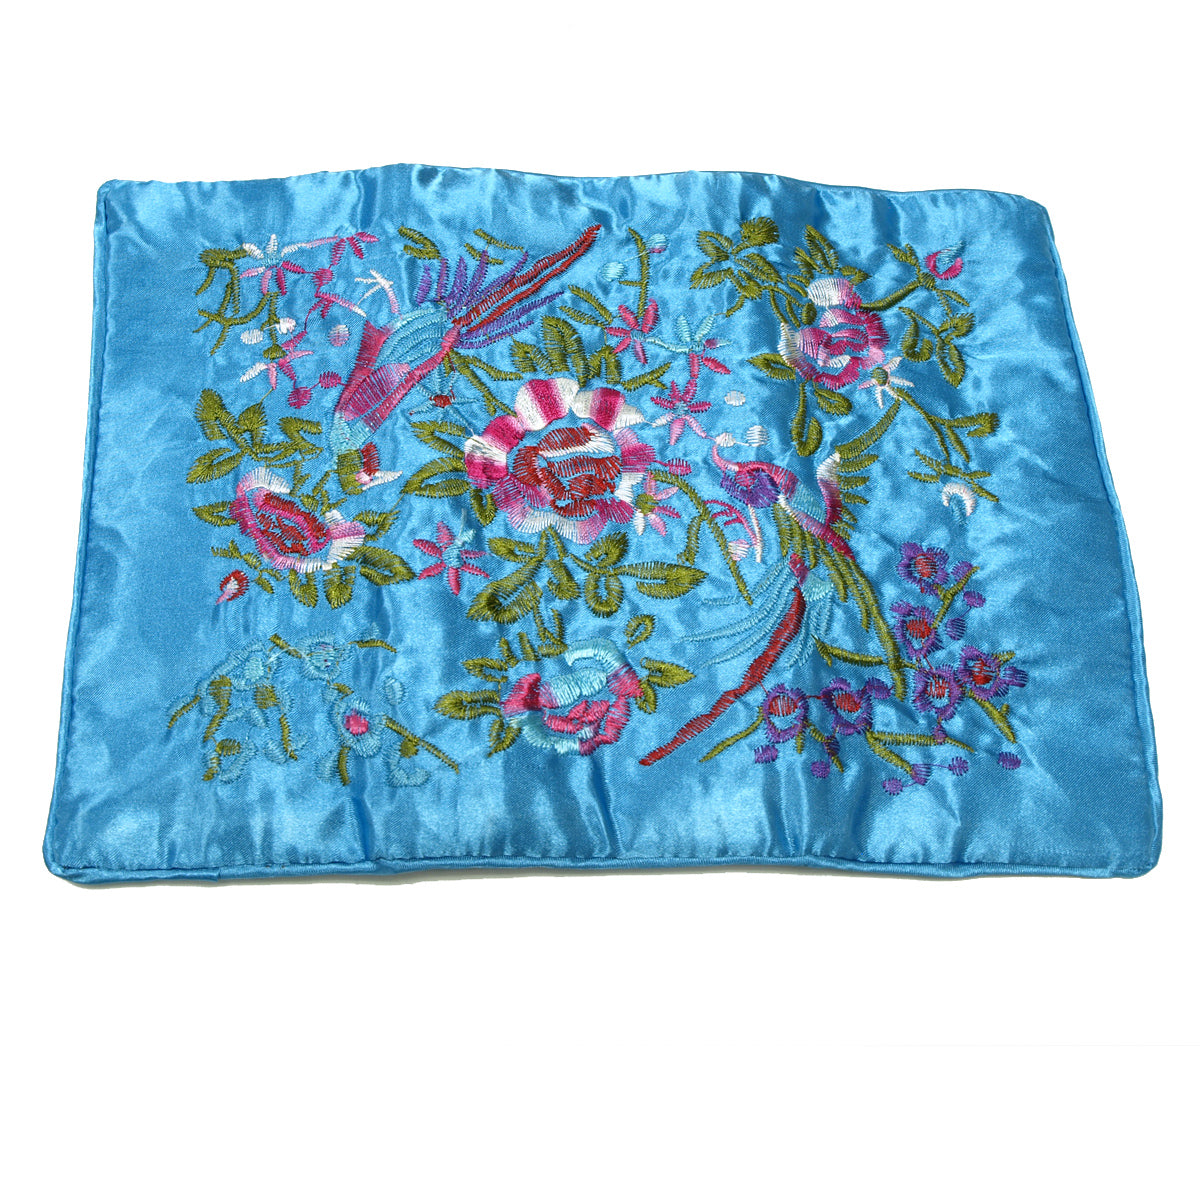 Large Silk Embroidered Jewelry Rolls - Sky Blue